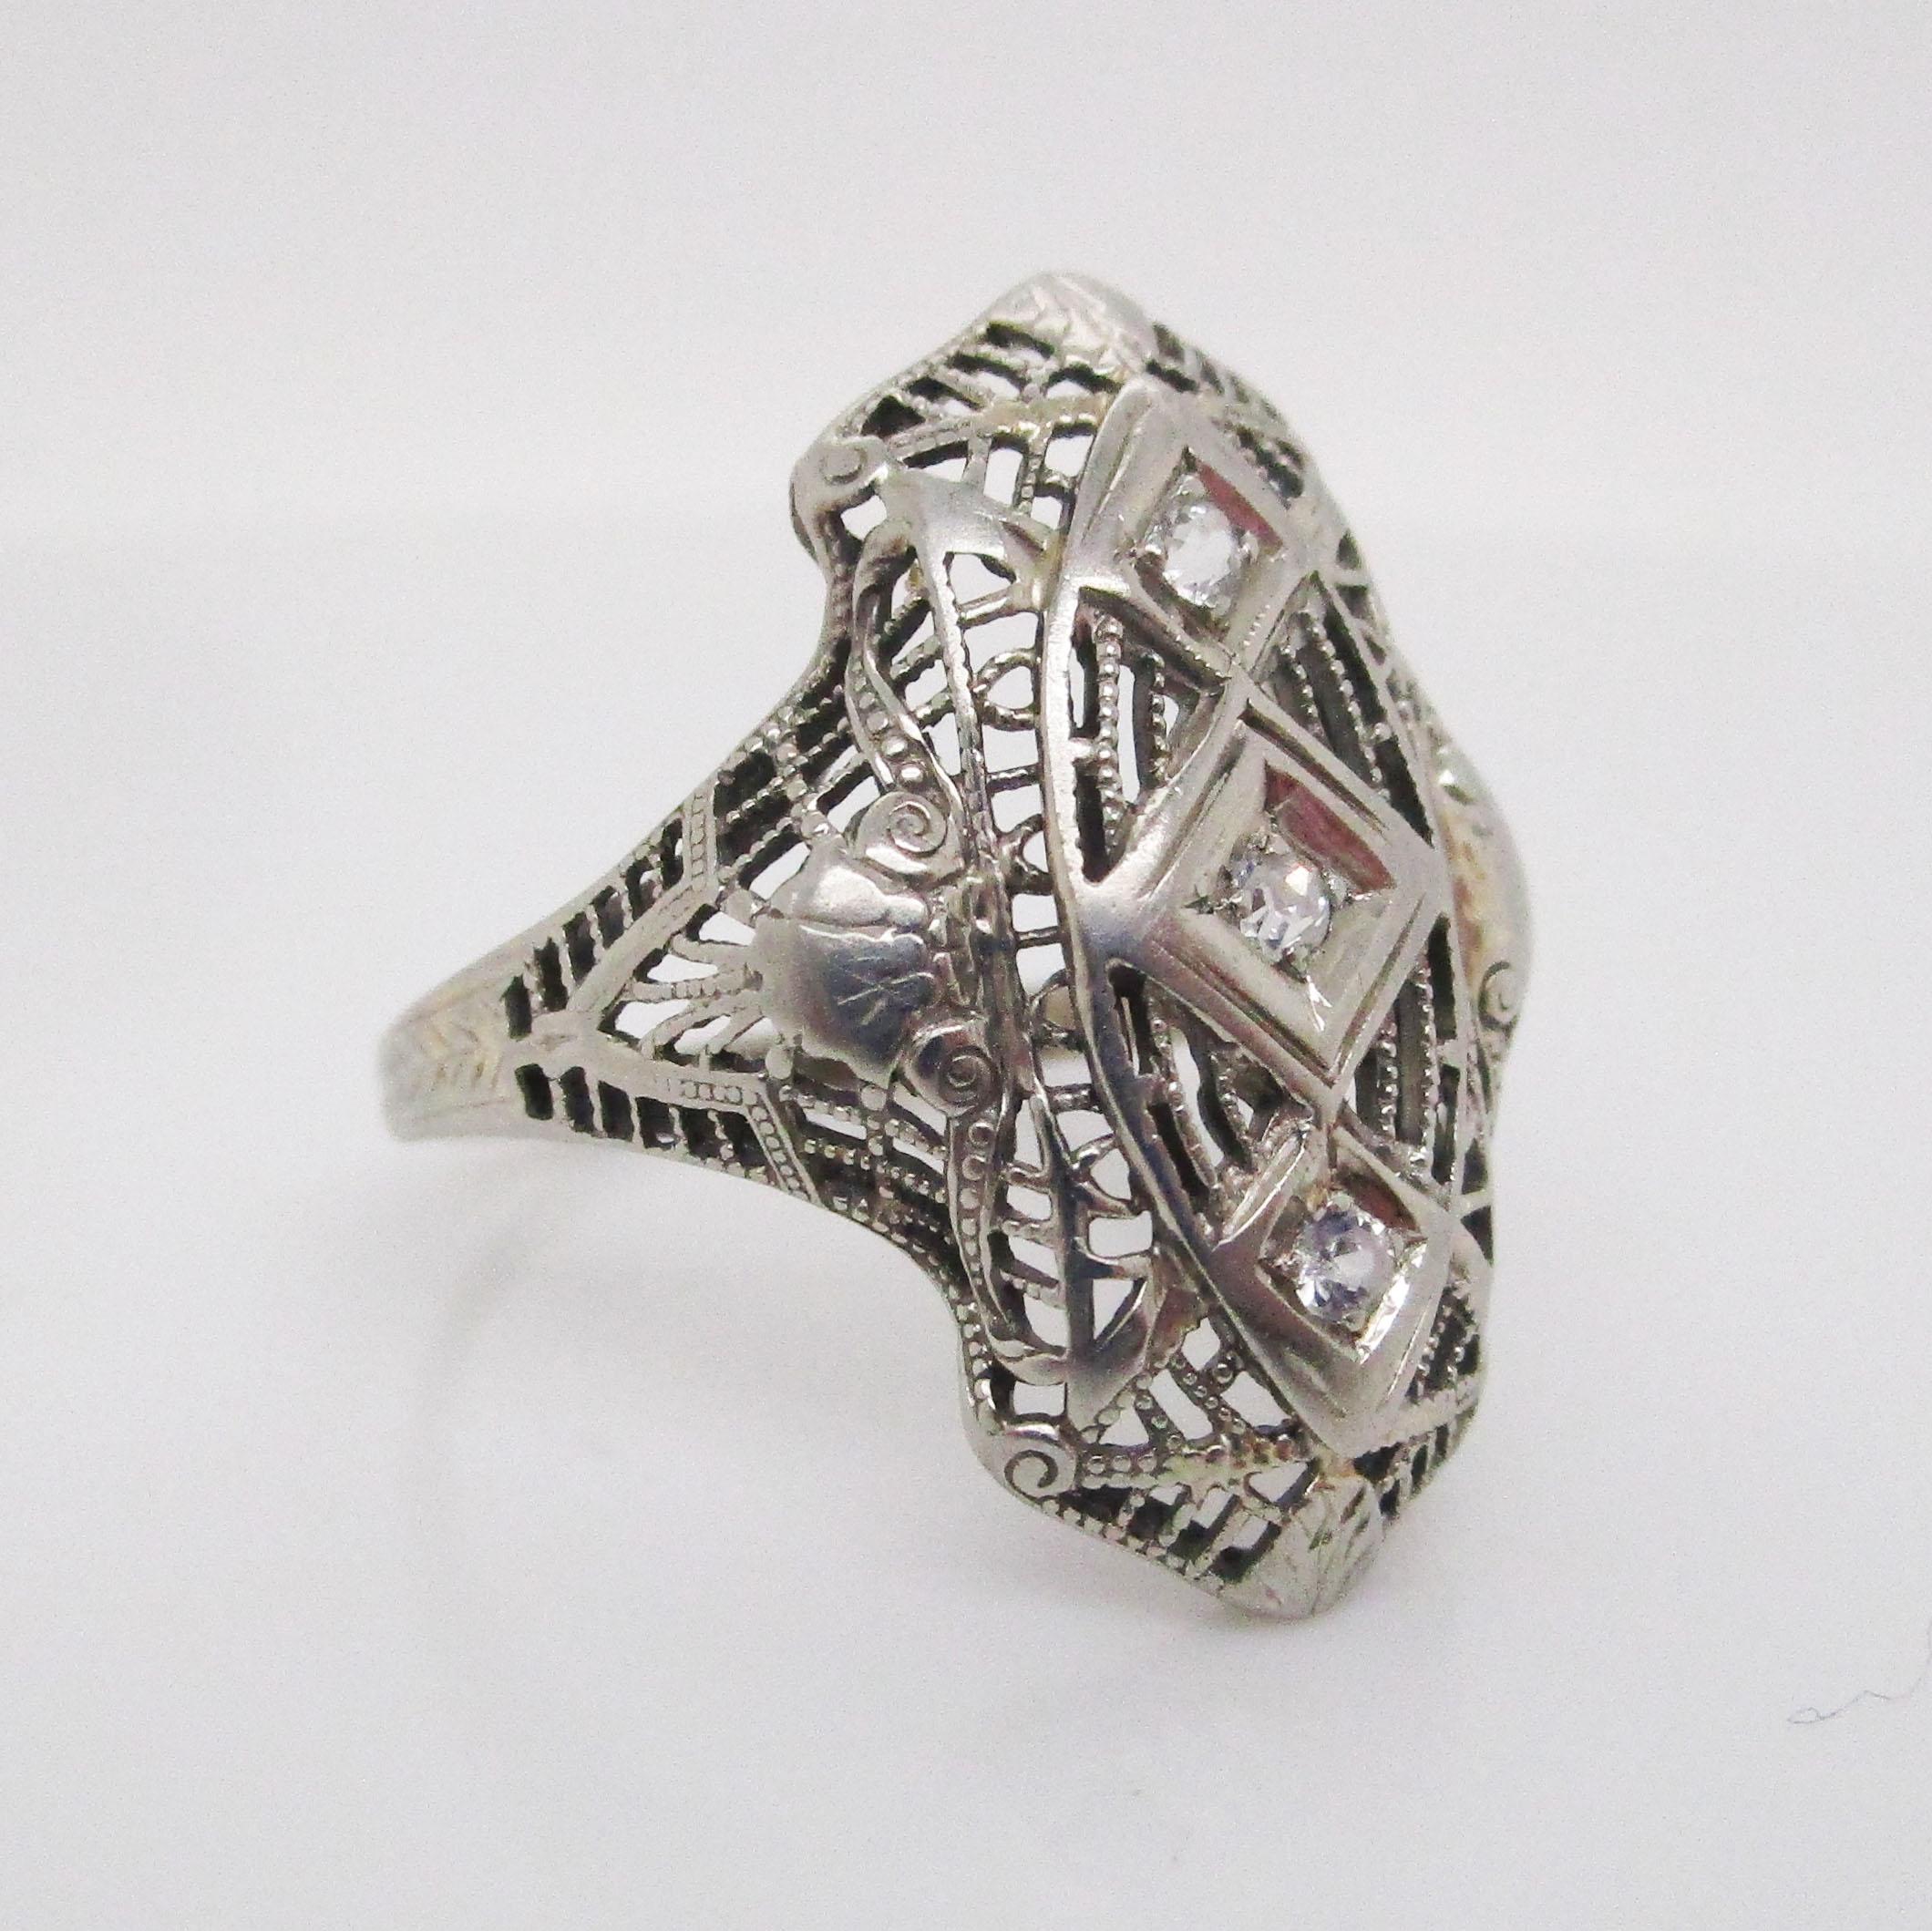 This definitive Art Deco ring is from 1925 and brings together bright 18k white gold and brilliant white diamonds to create a remarkably enchanting piece of wearable art! The ring features a gorgeous long linear layout that is a hallmark of Art